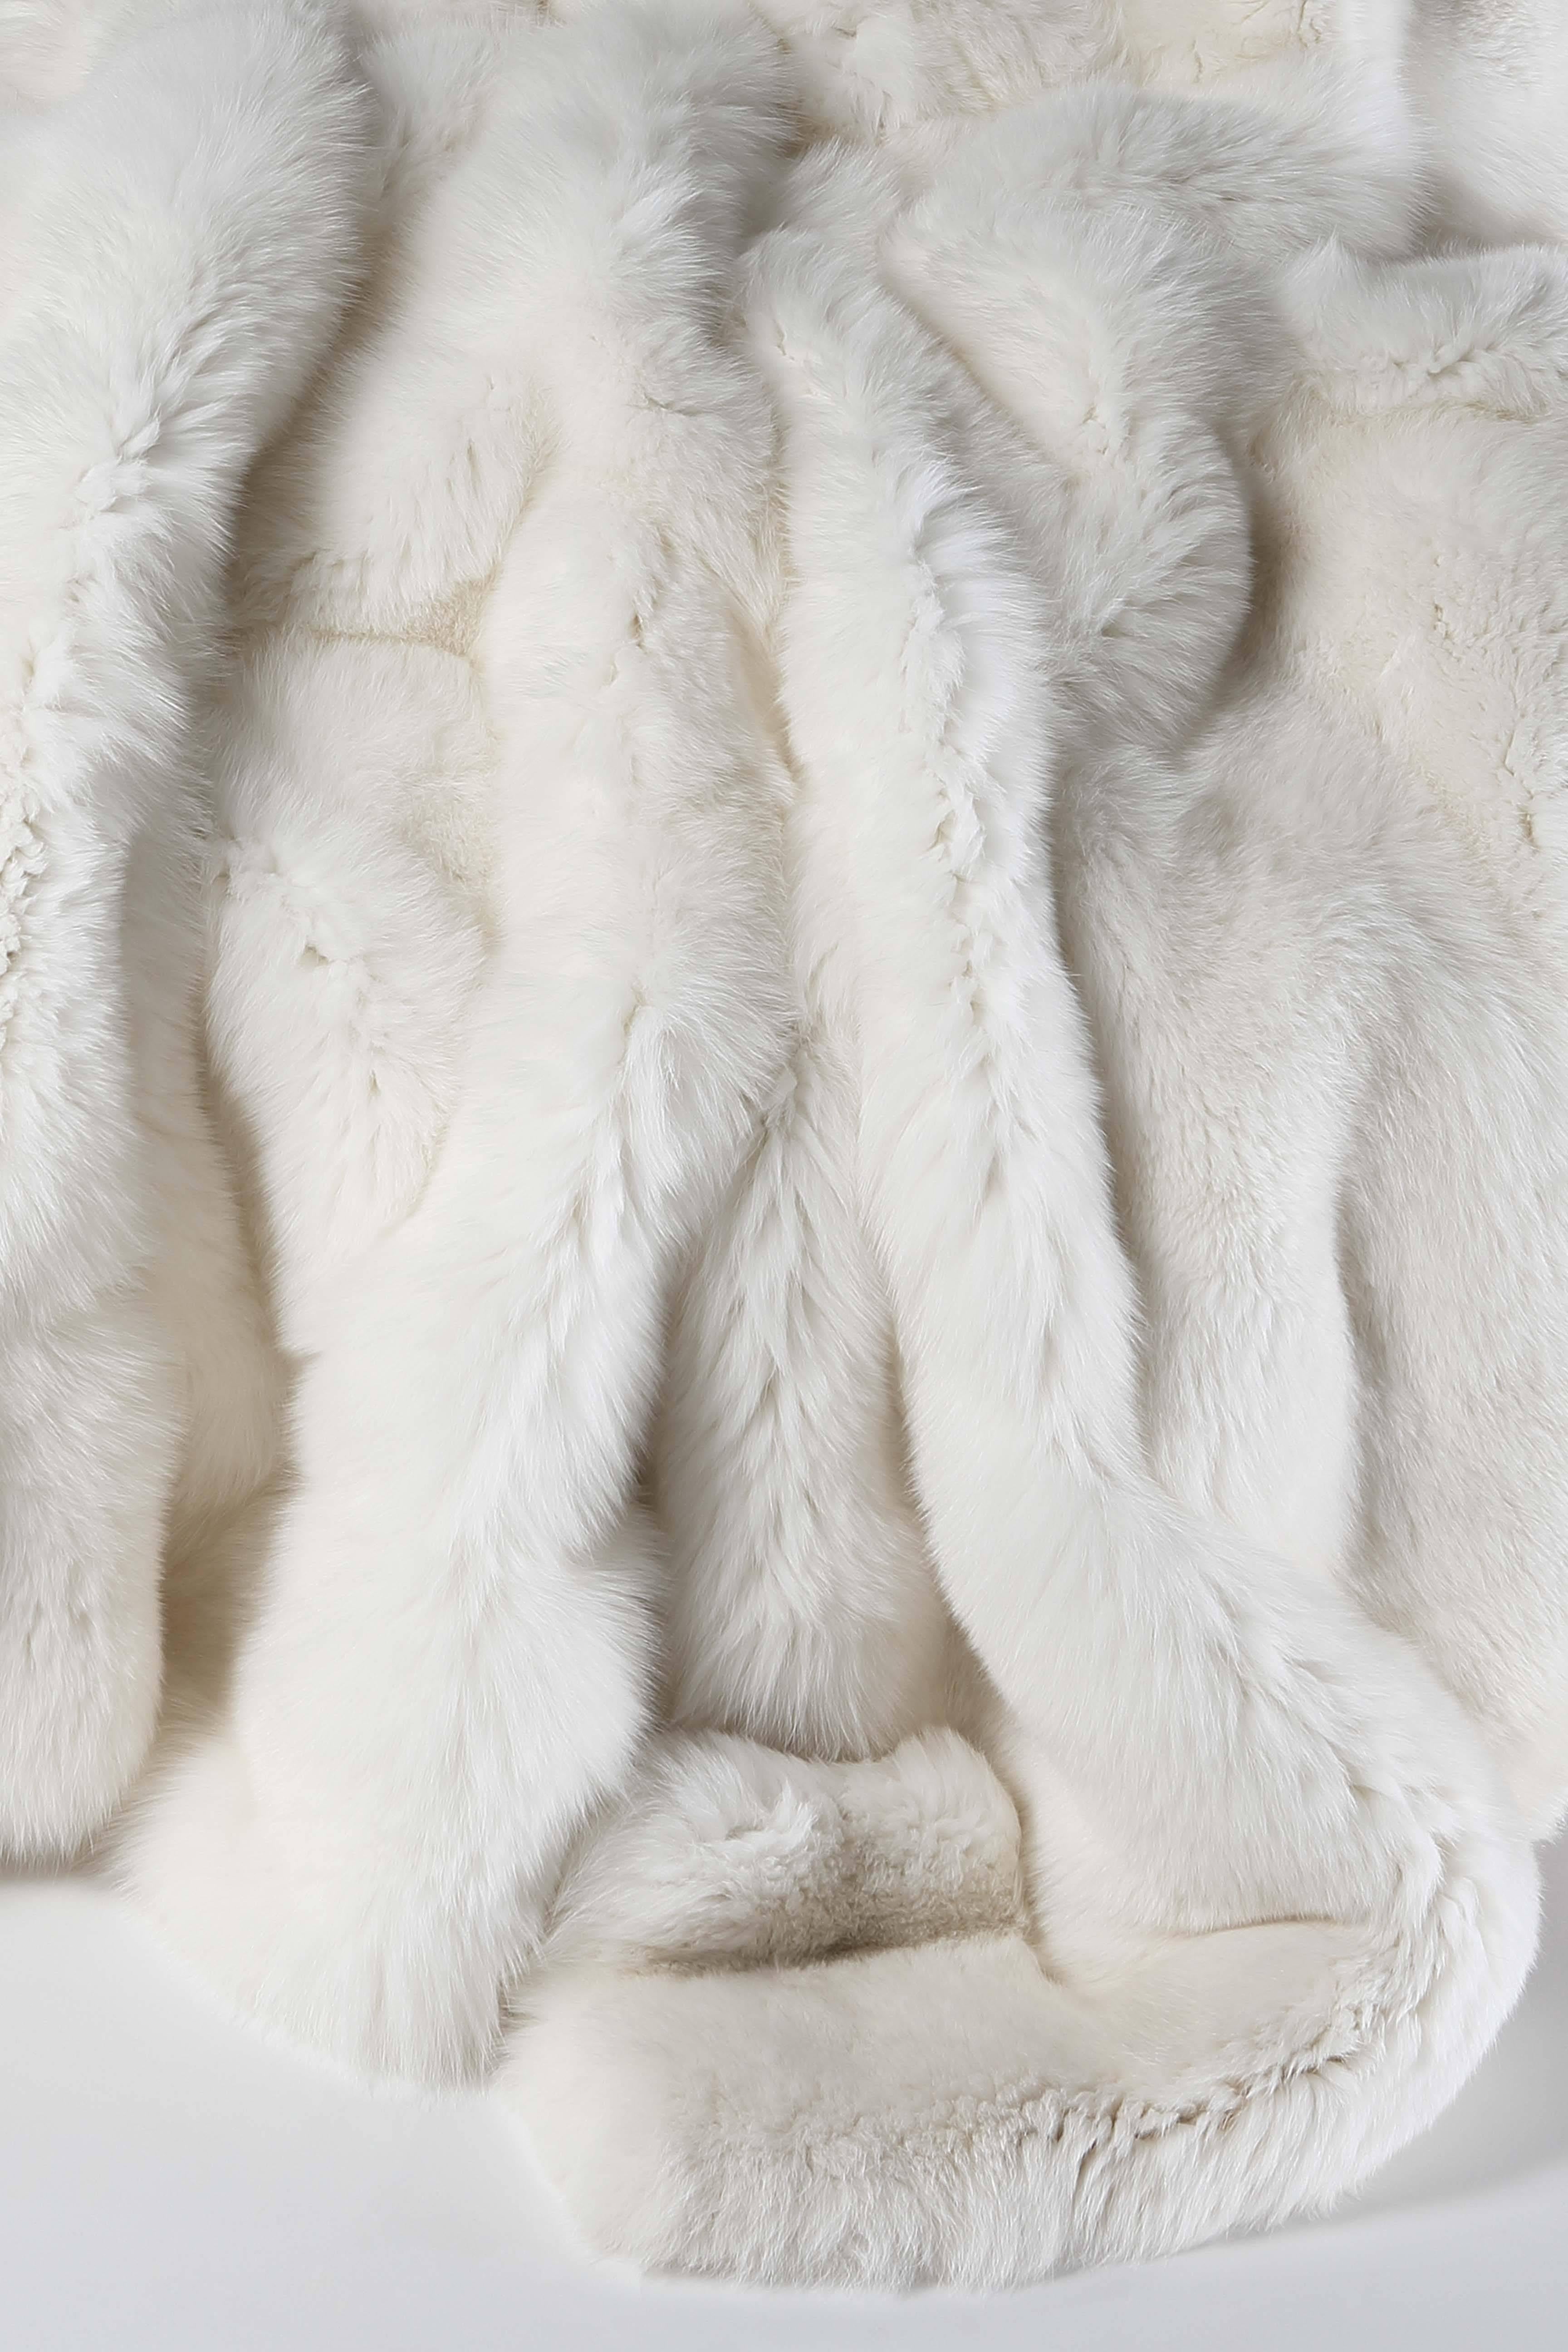 Luxury fur throw.
Lined with italian cashmere.
Size : 180x220 cm
Hand-stitched by Norki in France.
Fur origin /  Finland.